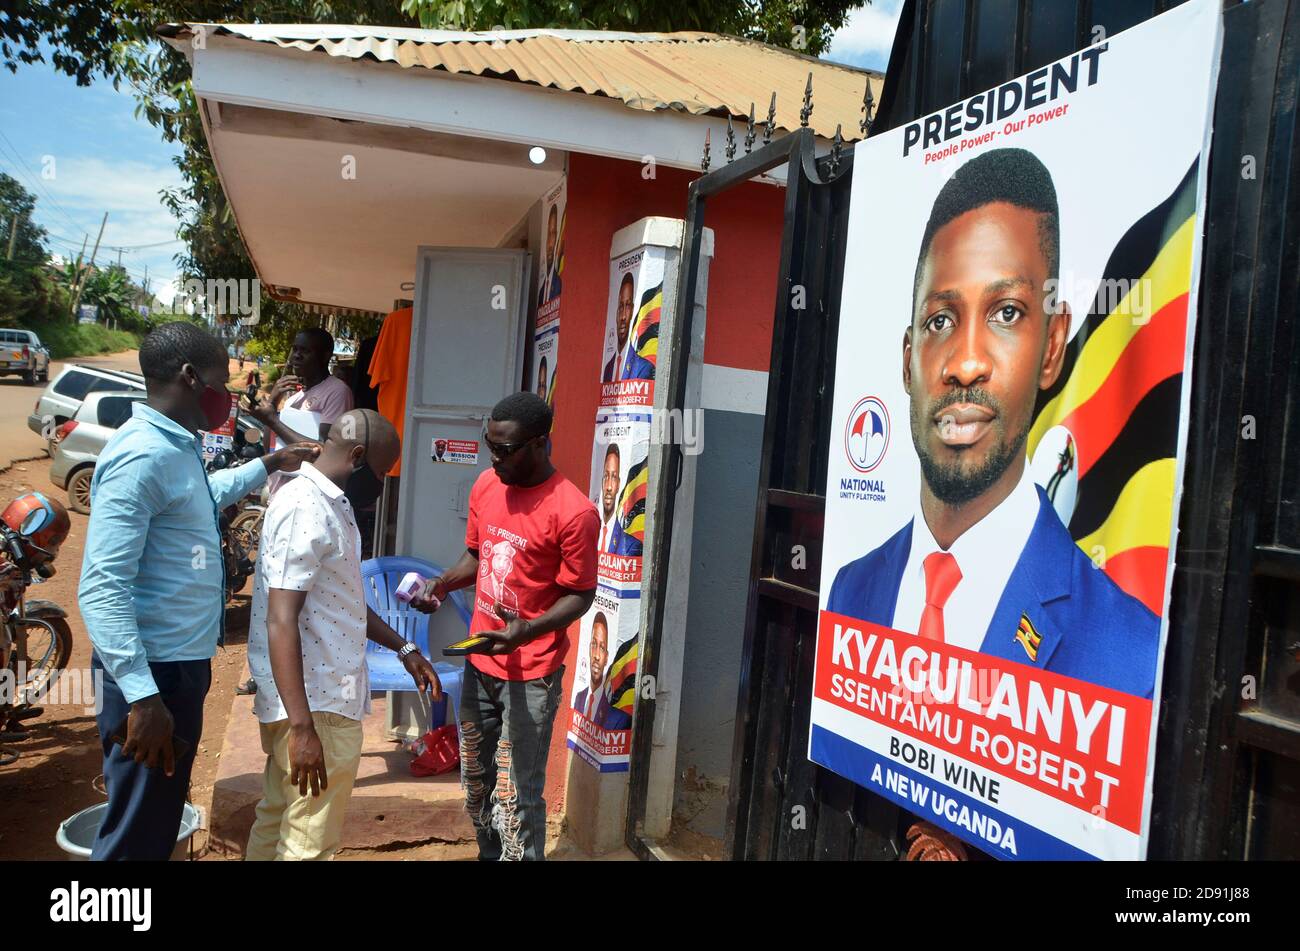 (Kampala, Uganda. 2nd Nov, 2020. A security guard checks people's body temperature at the entrance to the offices of opposition presidential candidate Robert Ssentamu Kyagulanyi, President of National Unity Platform (NUP), in Kampala, Uganda, Nov. 2, 2020. Uganda's electoral body on Monday started to nominate presidential candidates for 2021 general elections. Justice Simon Mugenyi Byabakama, chairperson of the Electoral Commission, said ten aspiring candidates have been verified and cleared for nominations in the two-day nomination exercise held at Kyambogo University Cricket Stock Photo